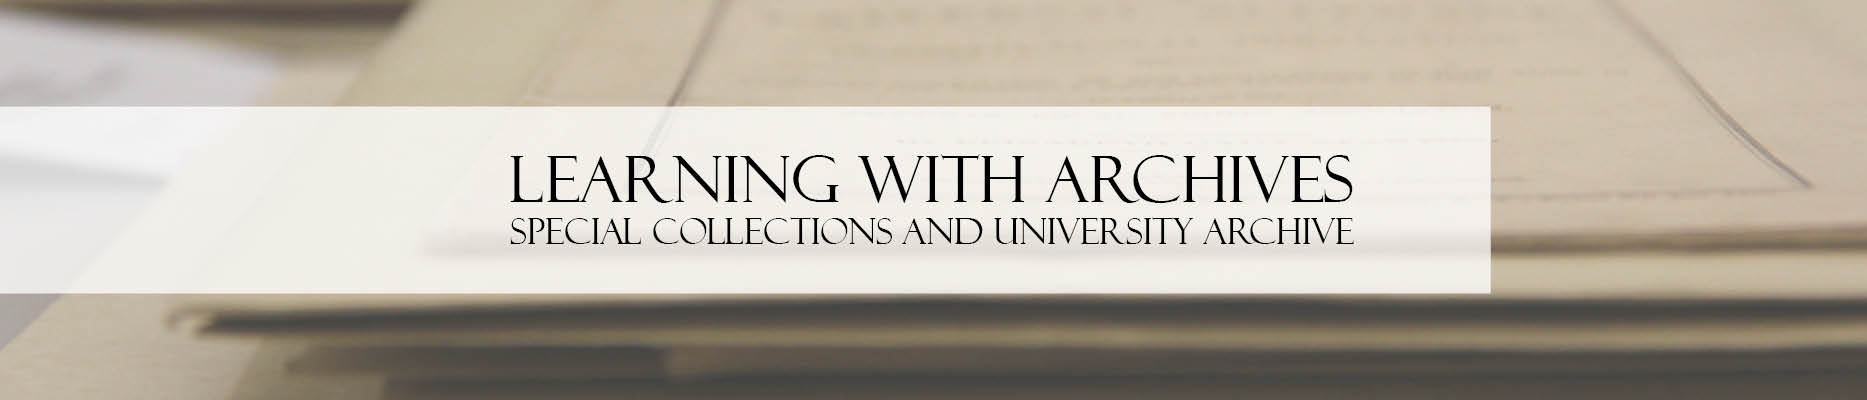 Learning with archives